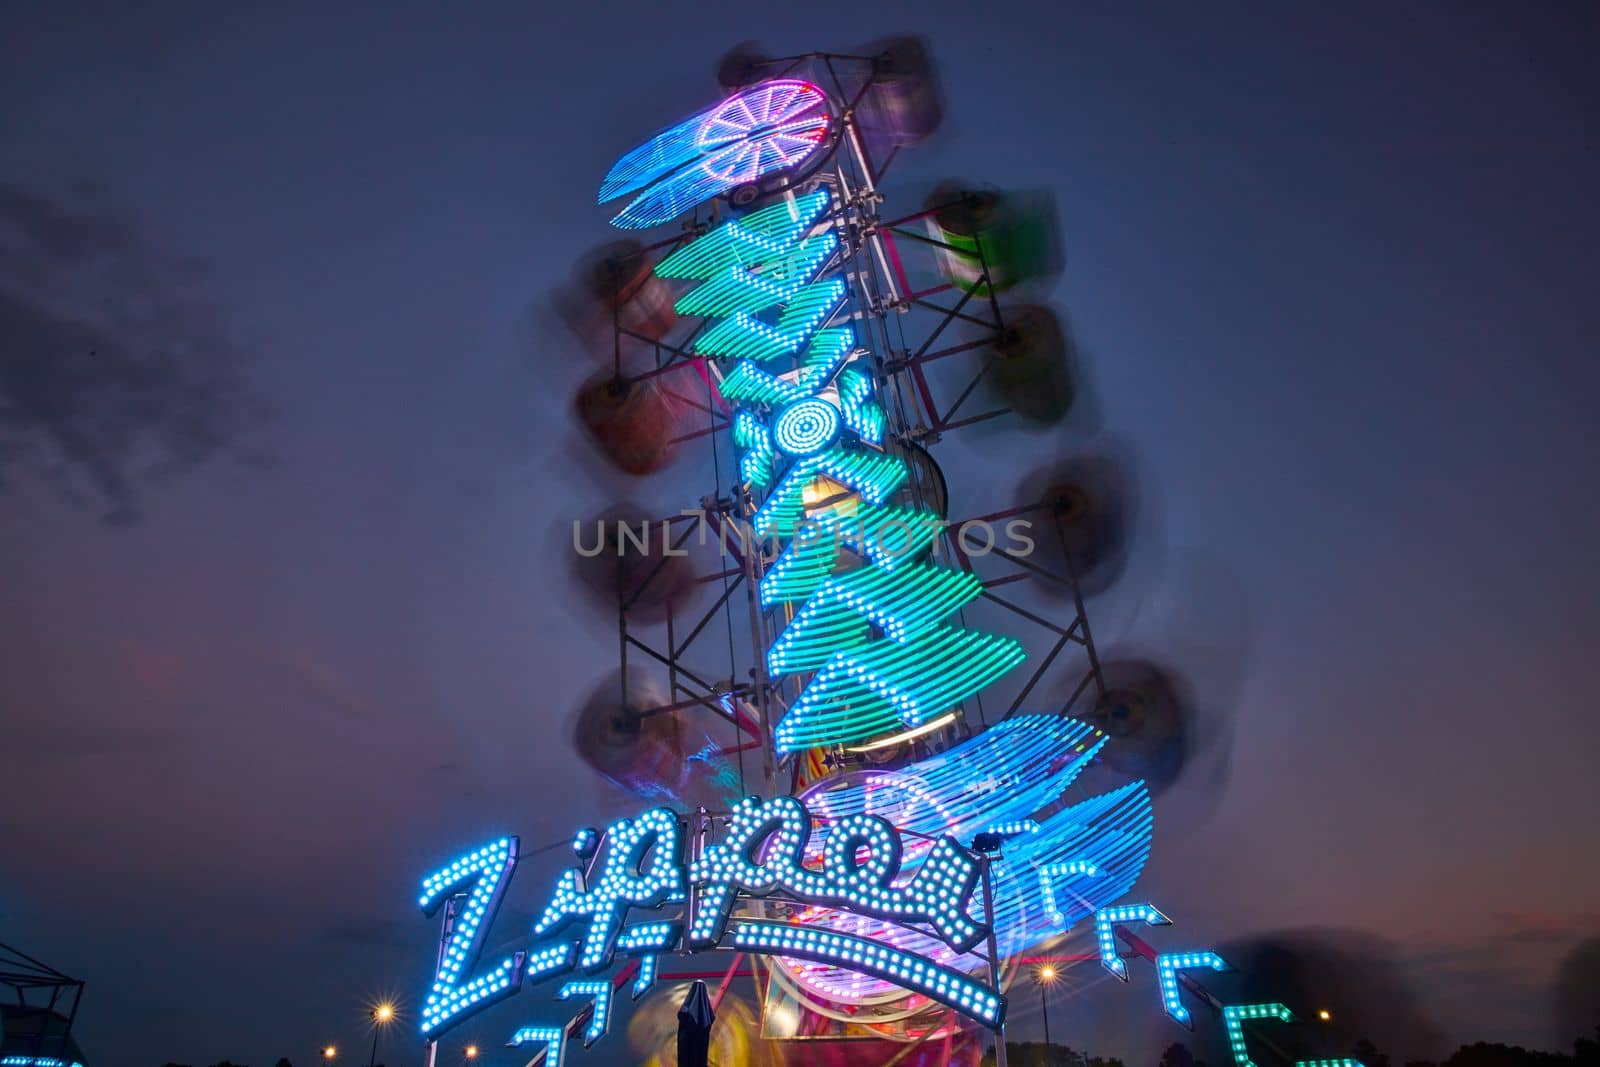 Zipper carnival ride with blurred lights during dusk at county fair by njproductions